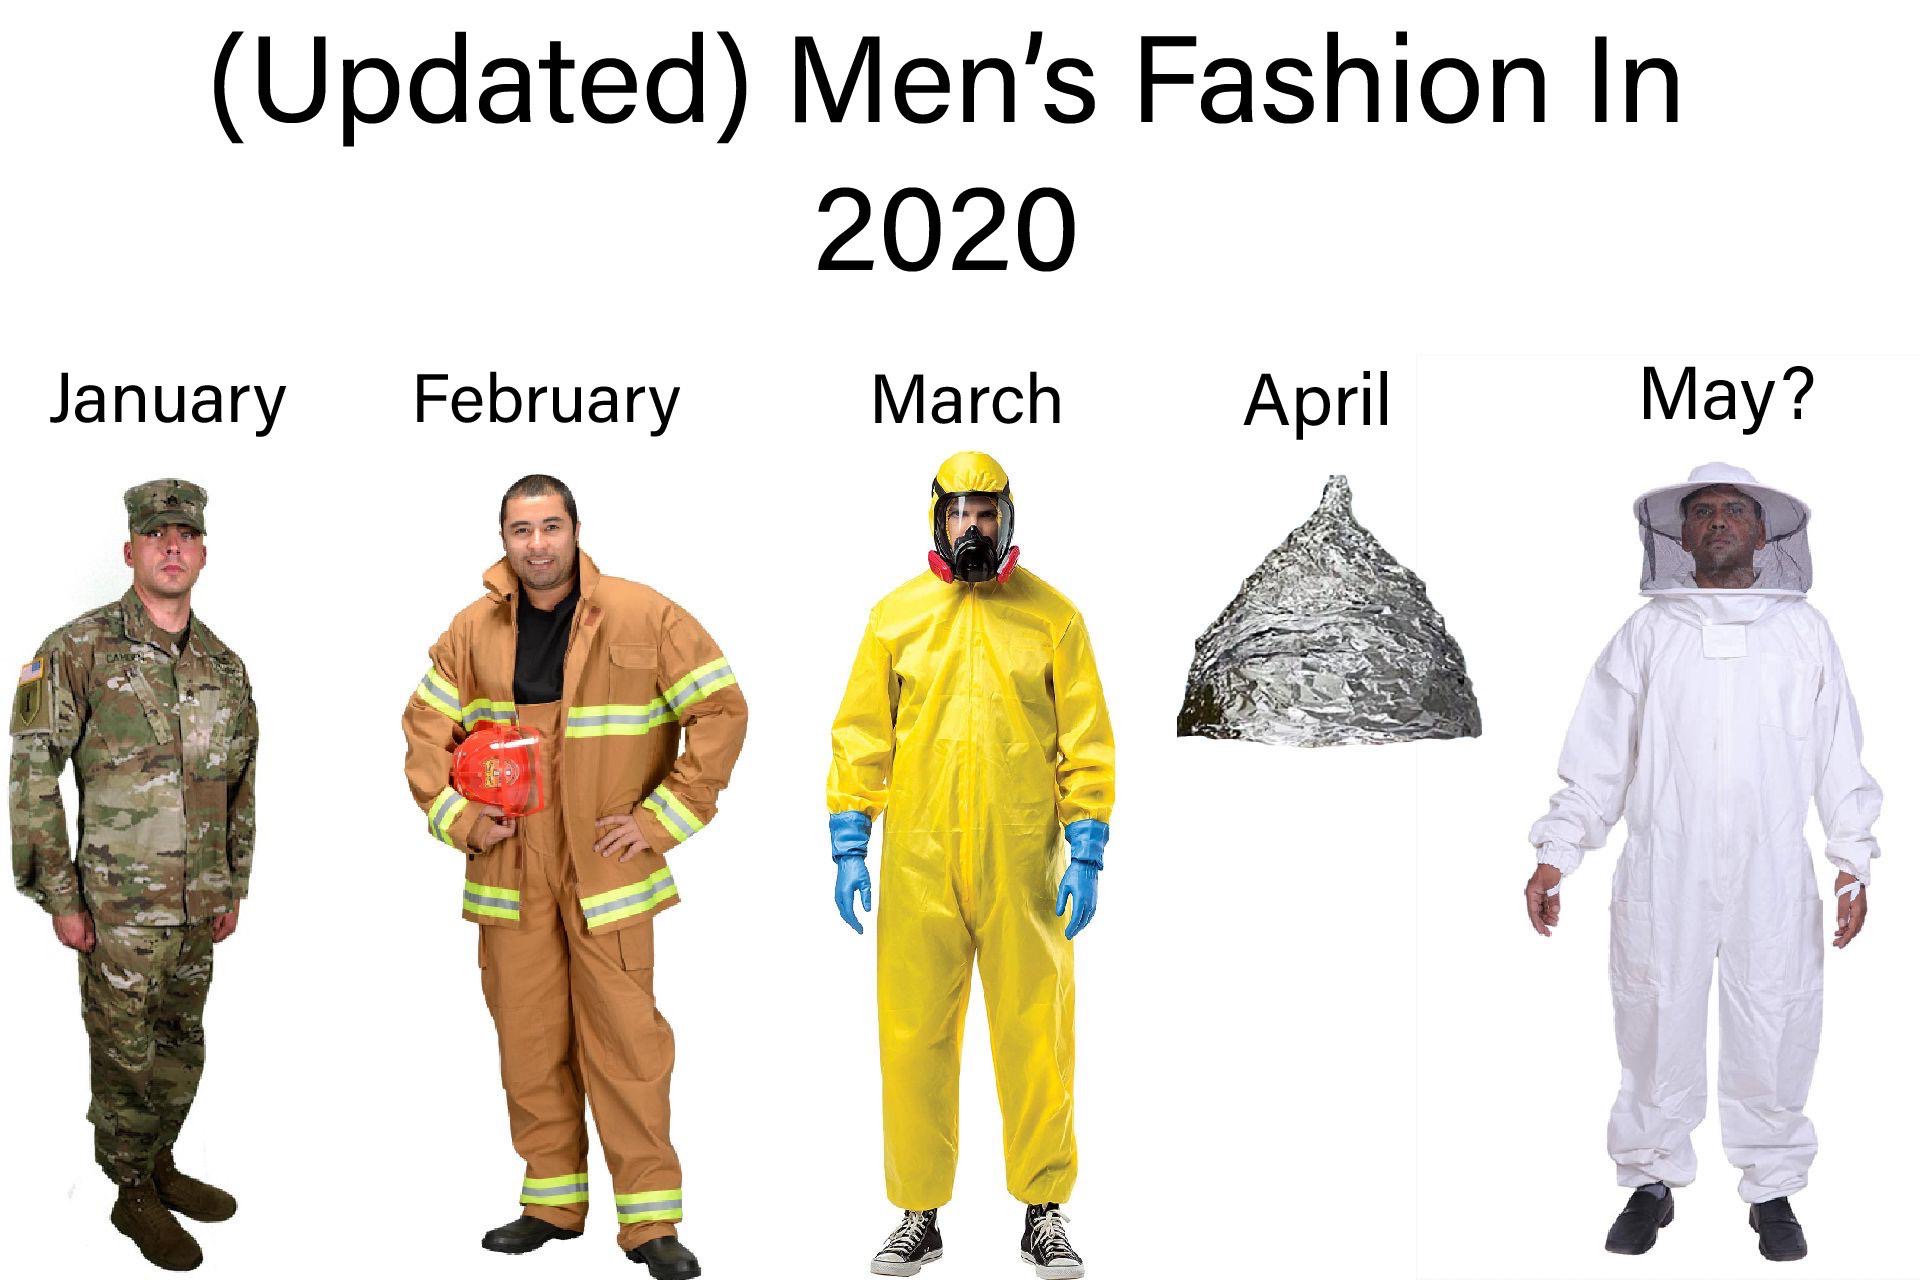 costume - Updated Men's Fashion In 2020 January February March April May?